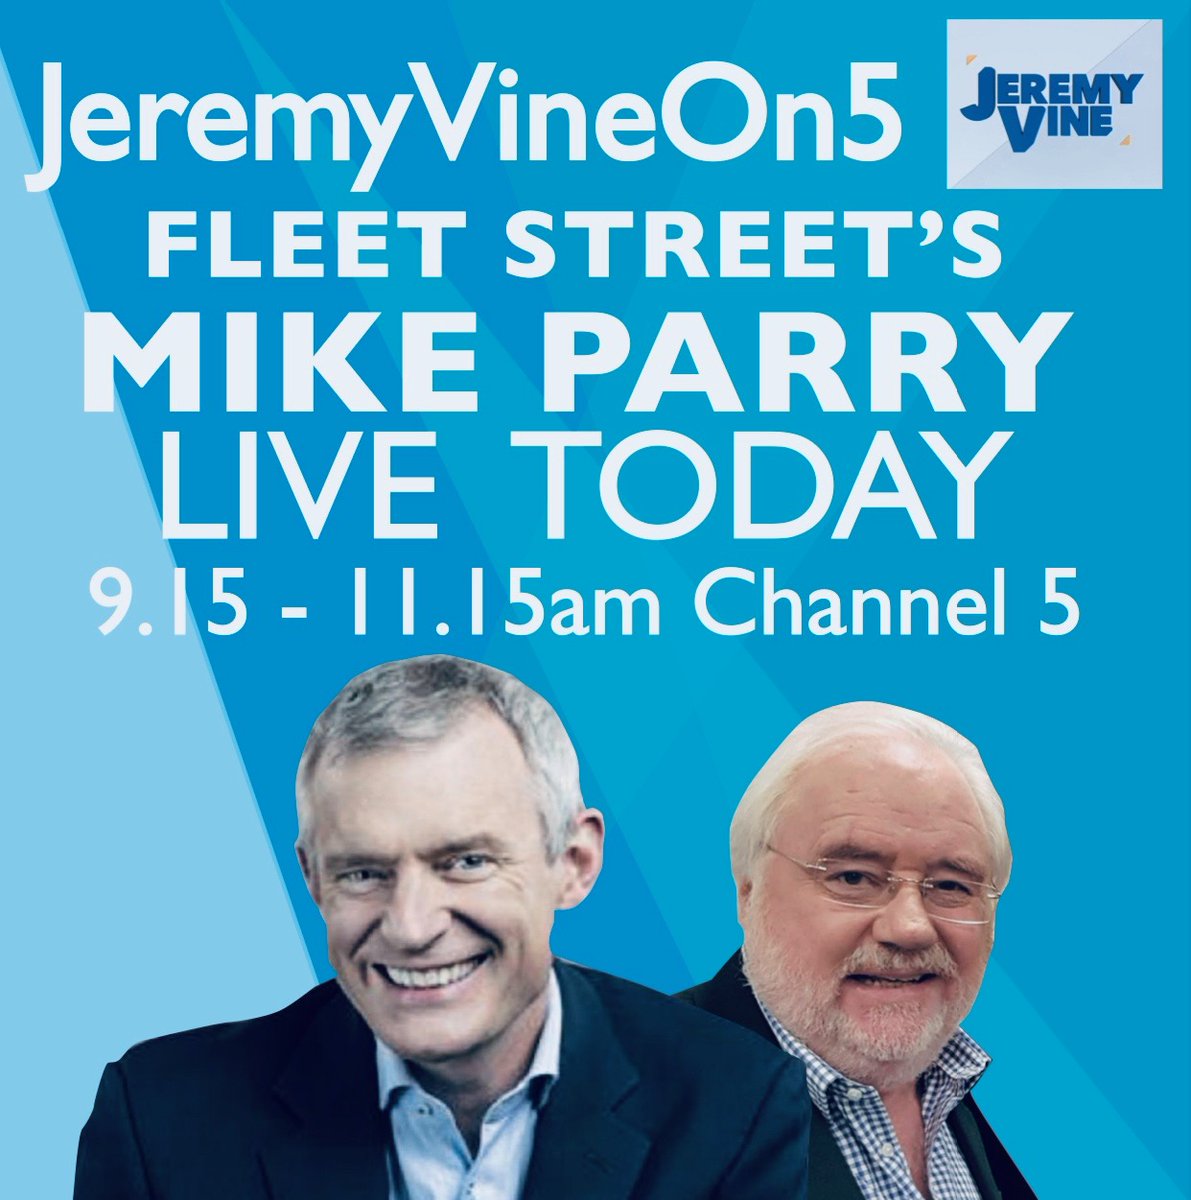 OK FOLKS .. Delighted to be joining @theJeremyVine this morning .. Getting stuck into the stories that are shaping all our lives .. with @nelufar .. Get tuned at 9.15am @JeremyVineOn5 @channel5_tv @ITNProductions ..